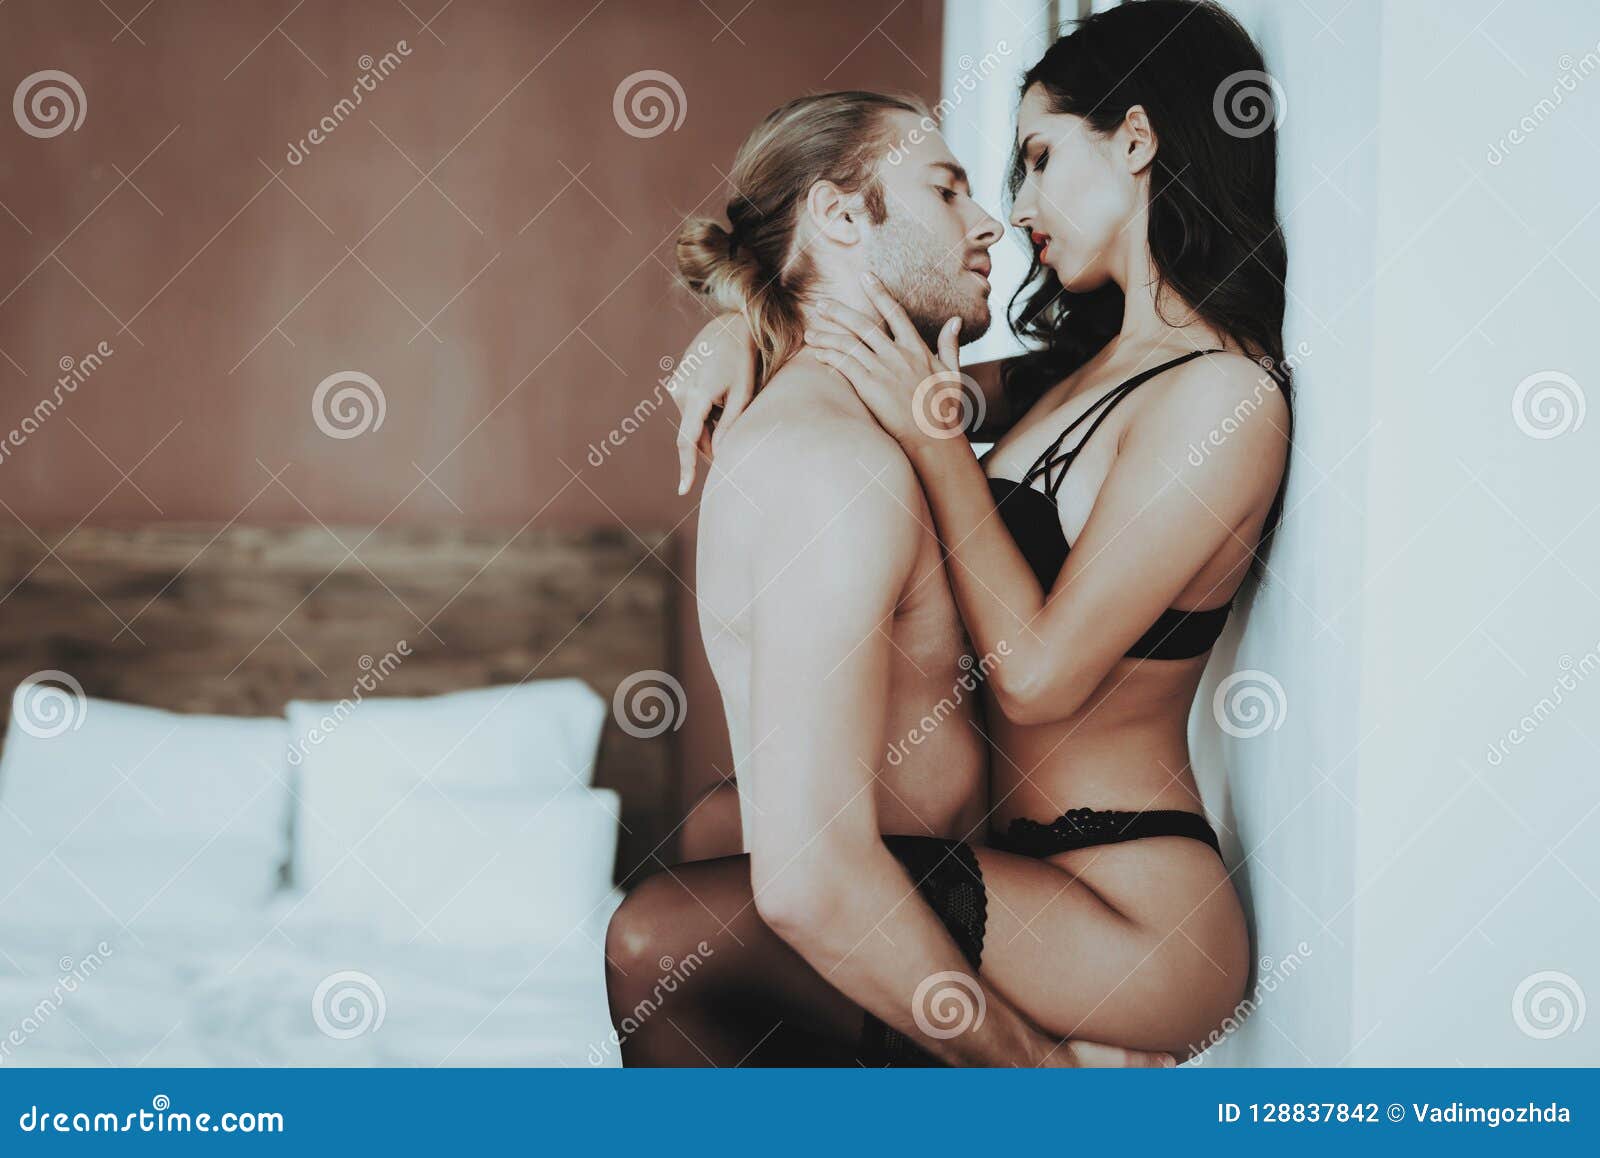 Passionate Man Holding Woman in Lingerie Near Wall Stock Photo image